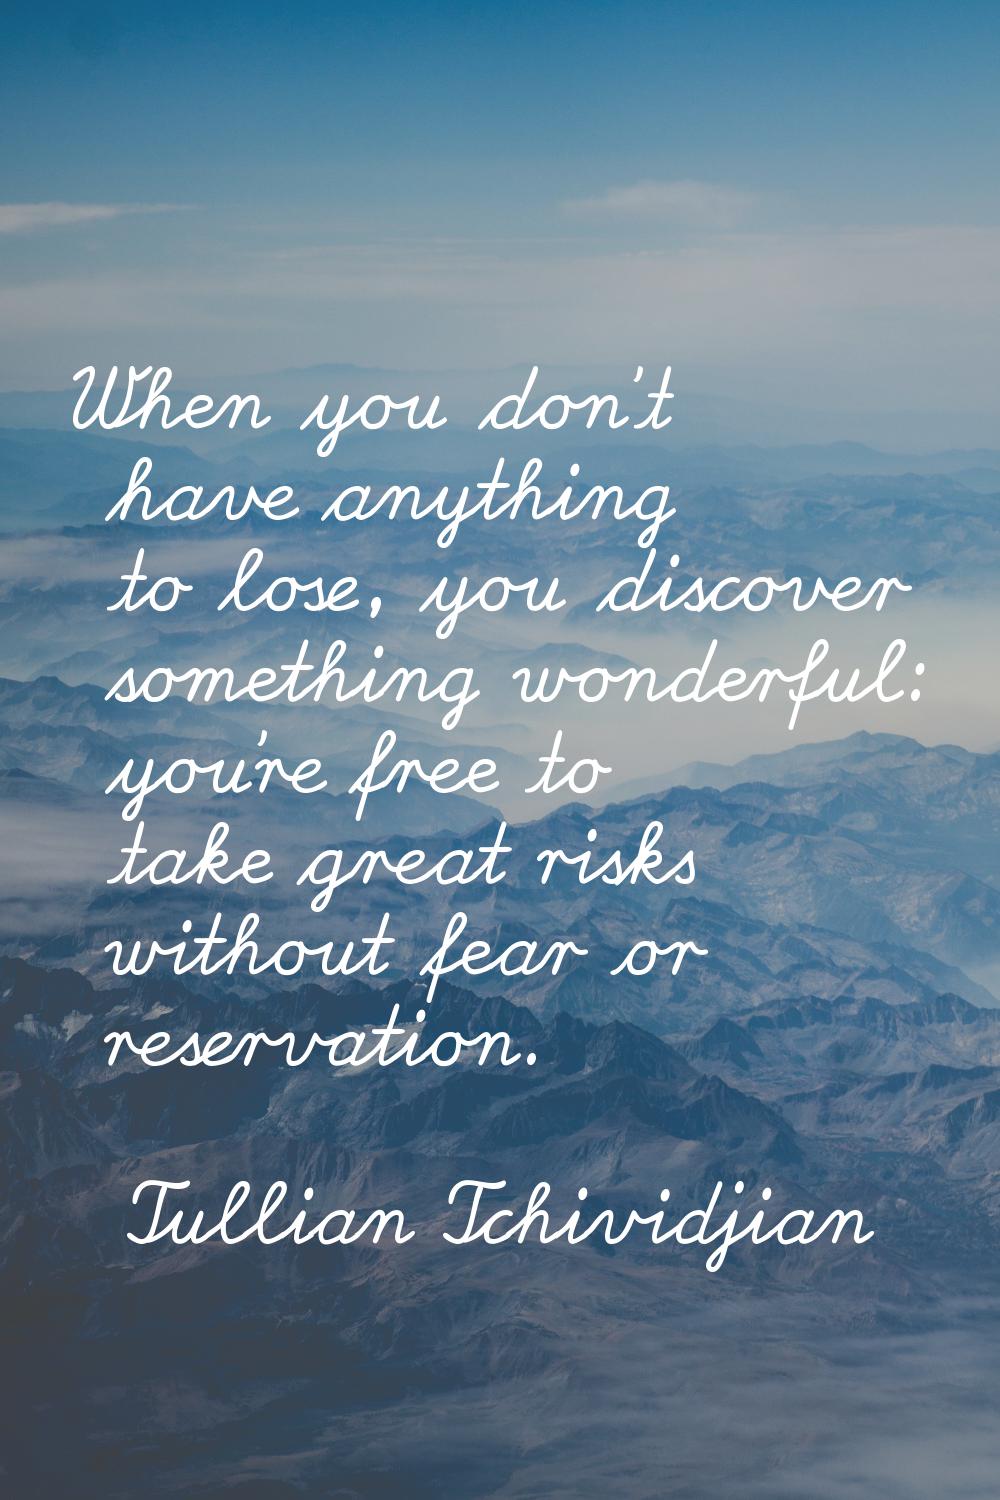 When you don't have anything to lose, you discover something wonderful: you're free to take great r